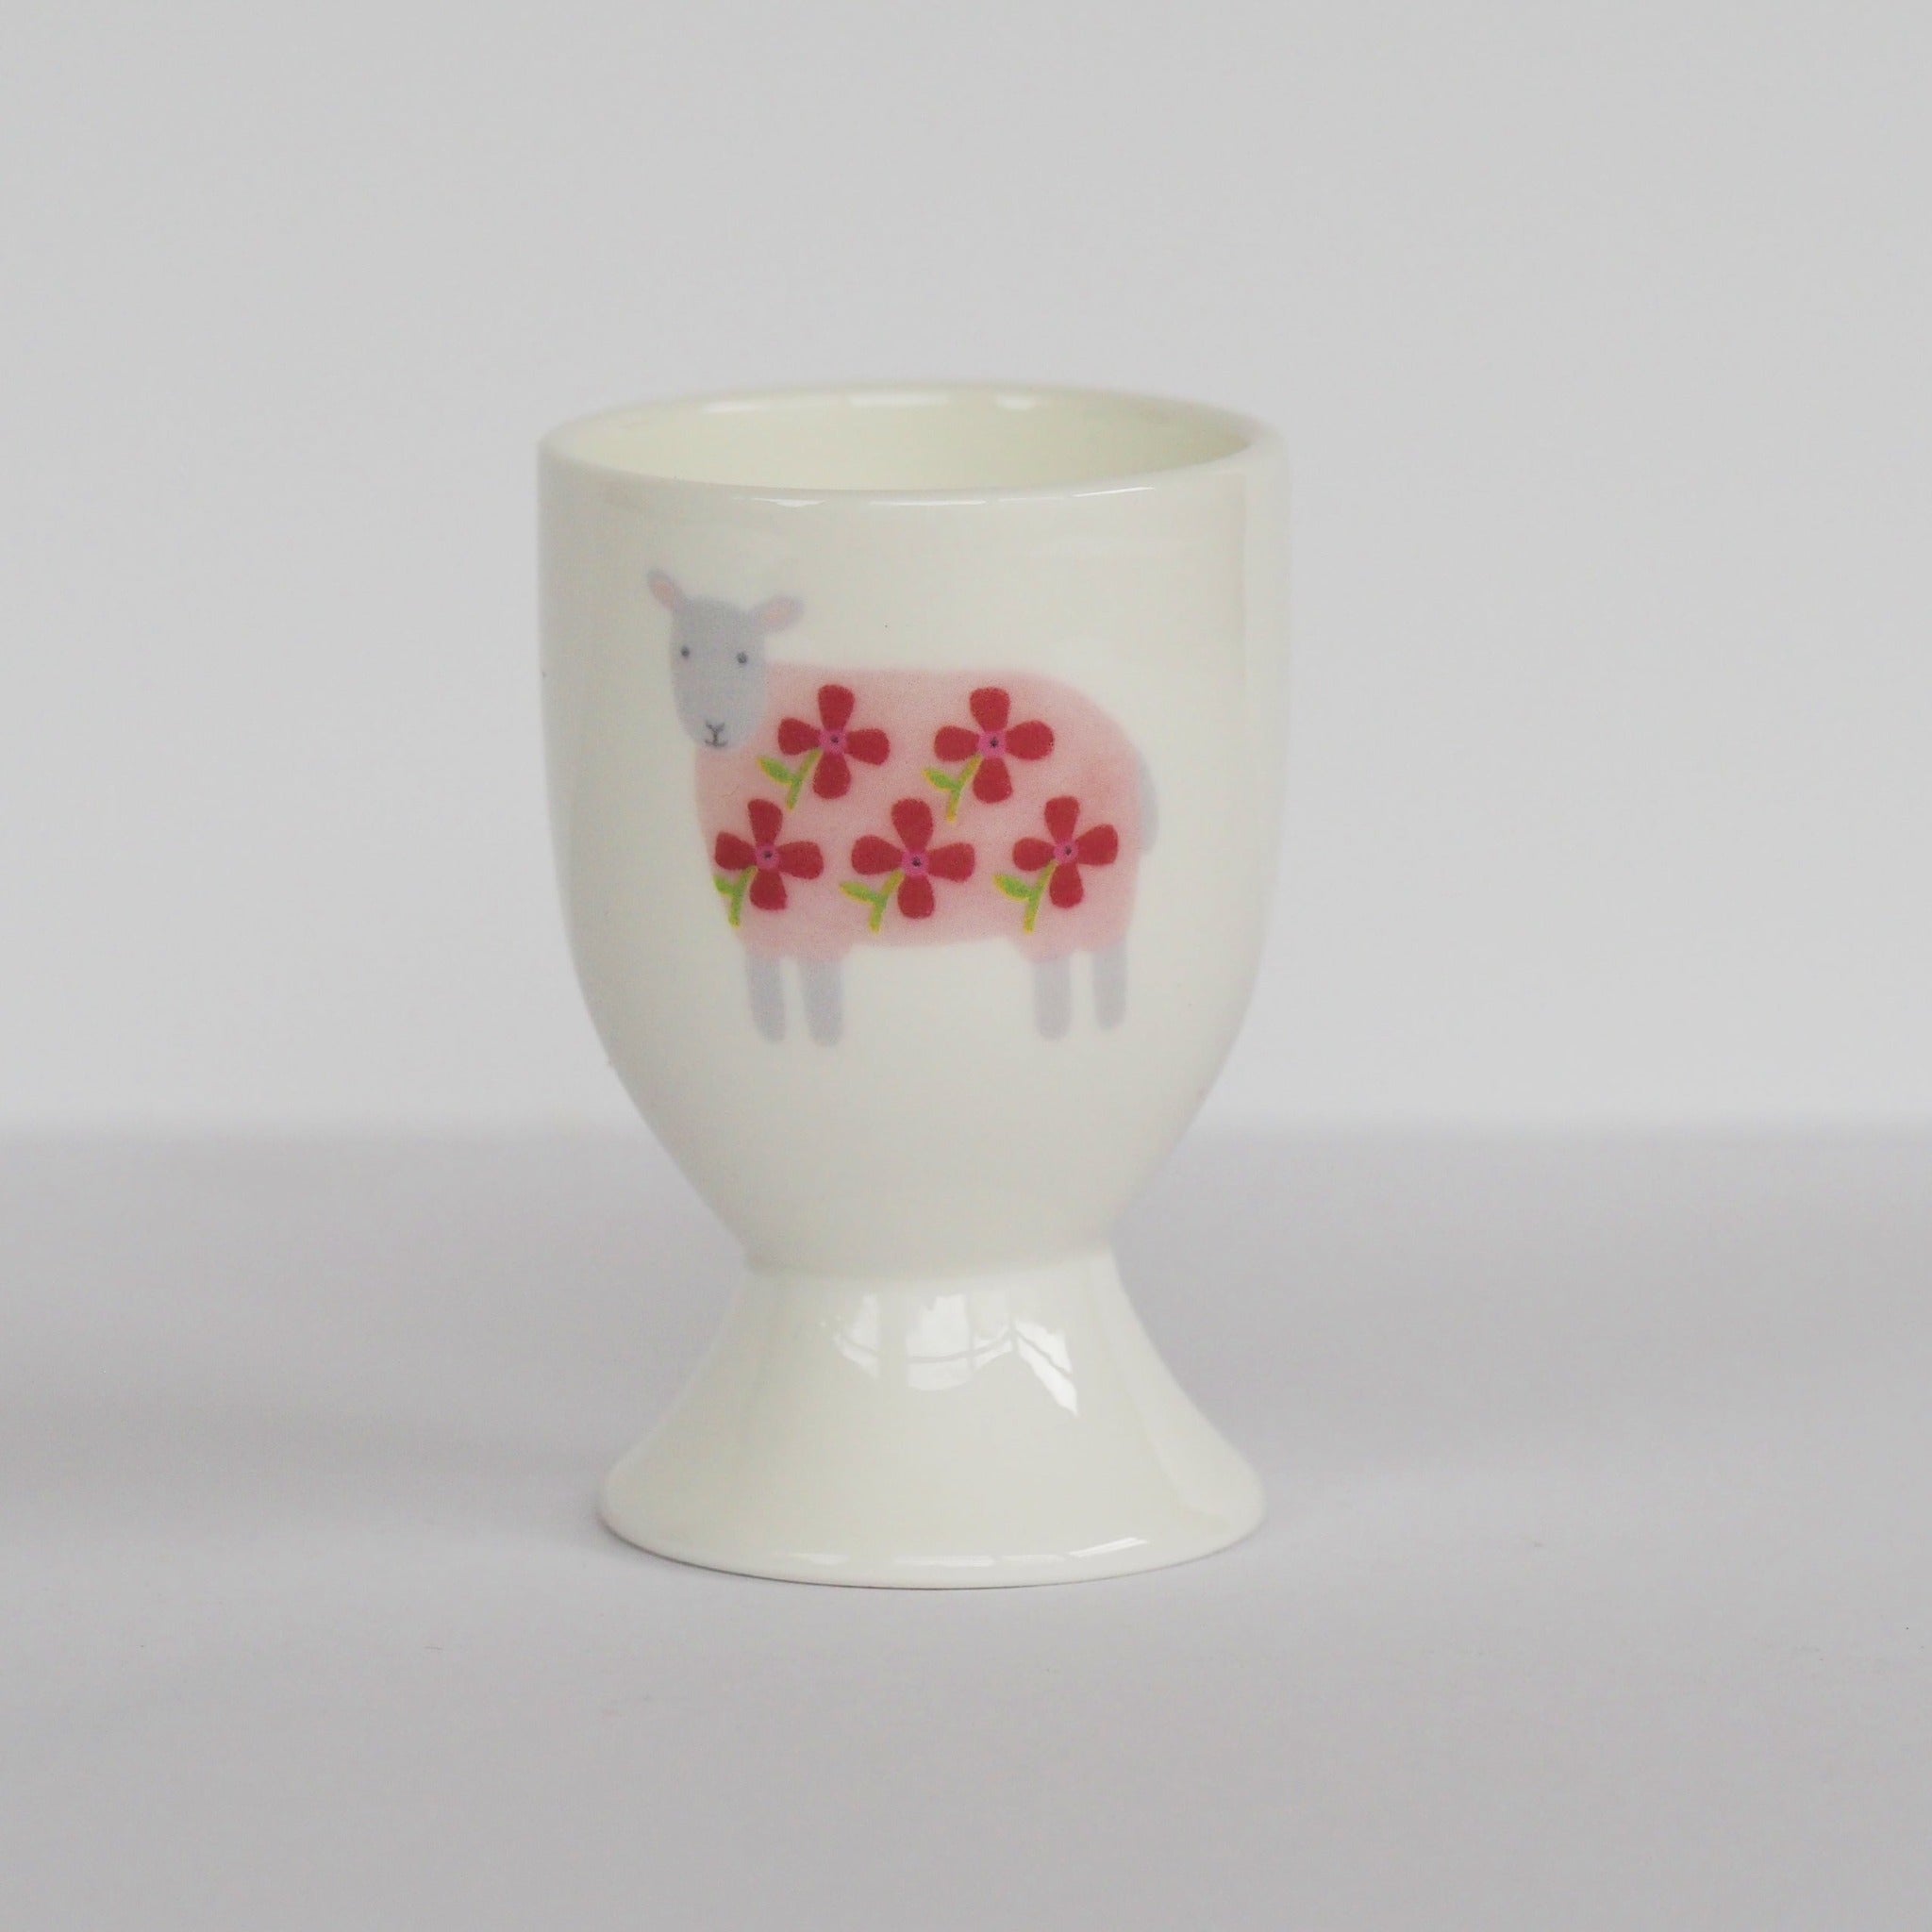 Pink Sheep Egg Cup by Mary Kilvert